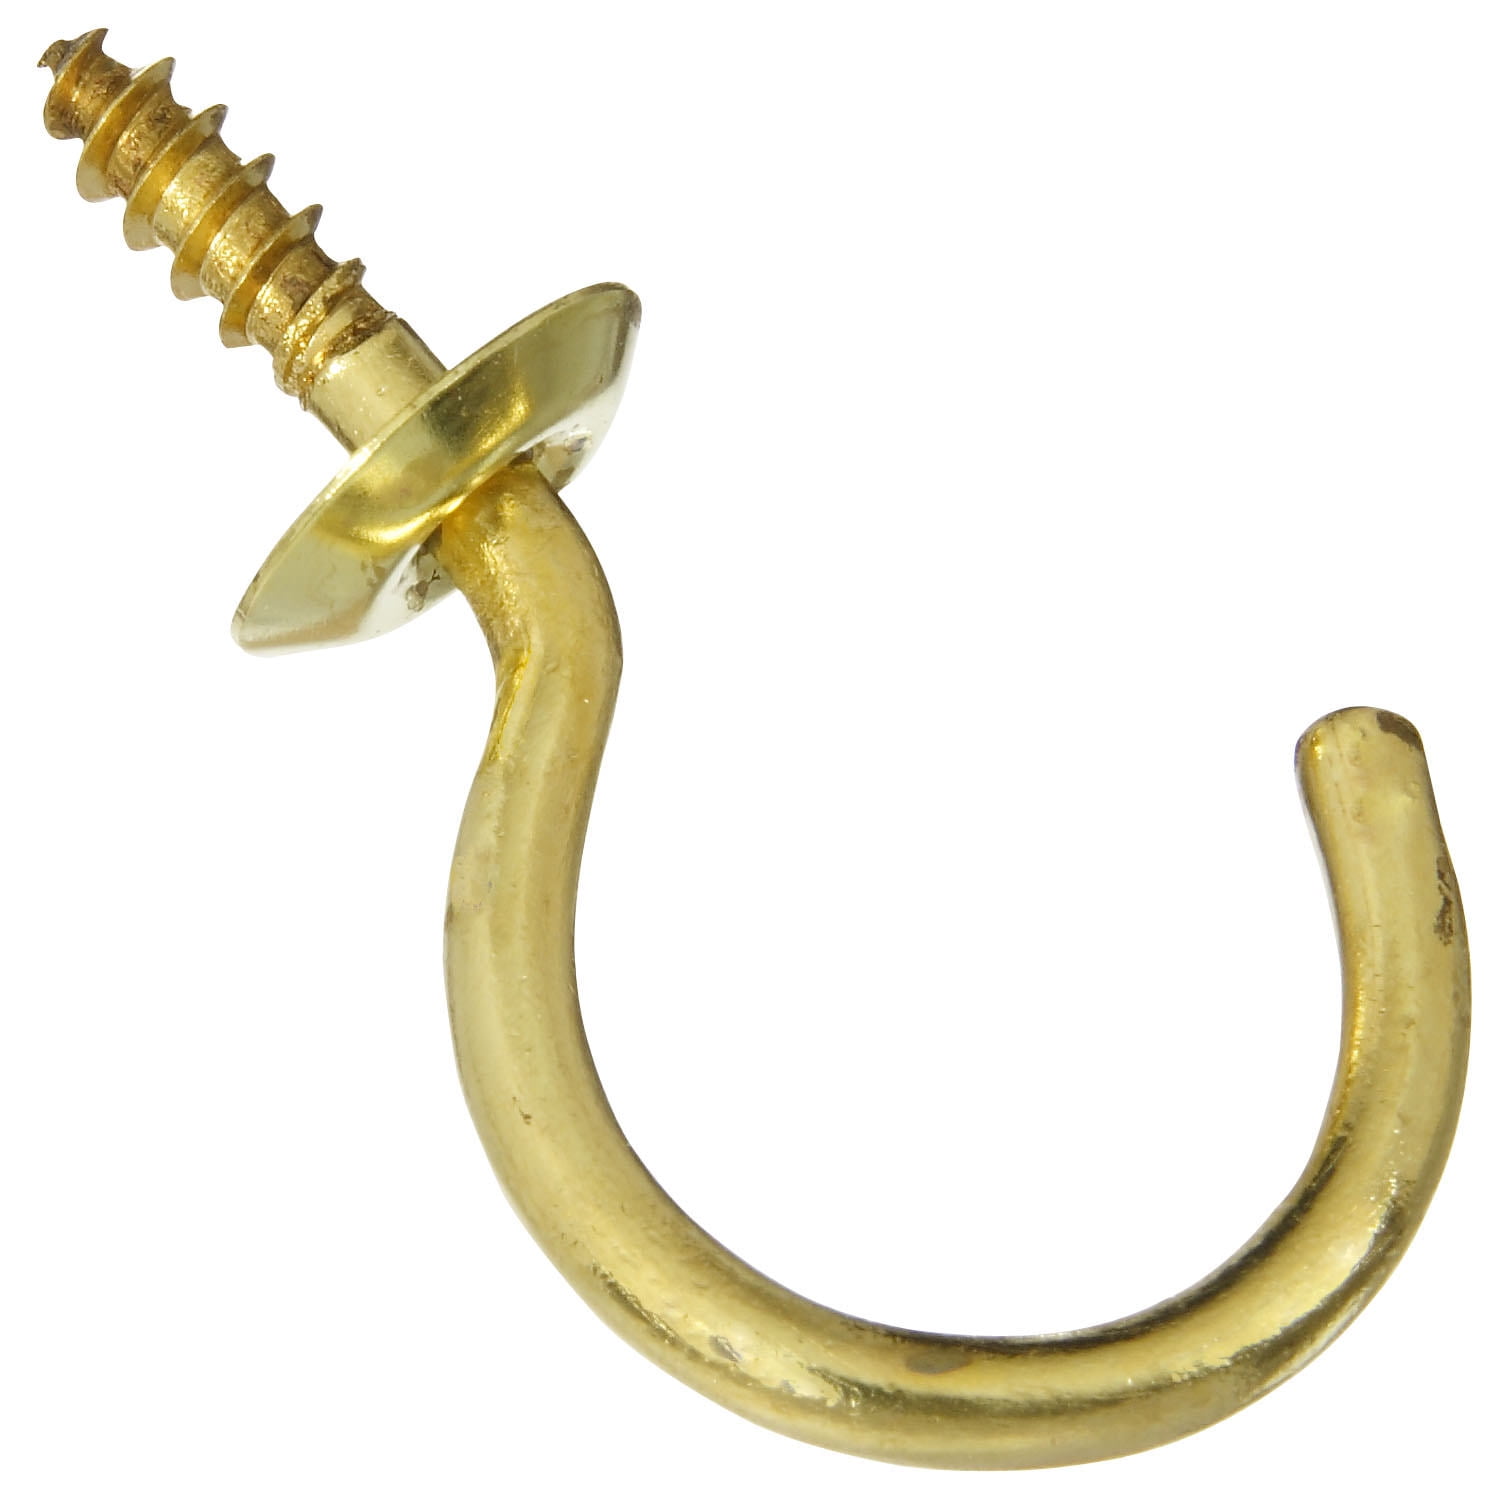 ARROW 160378 7/8 Cup Hooks Pack of 36 